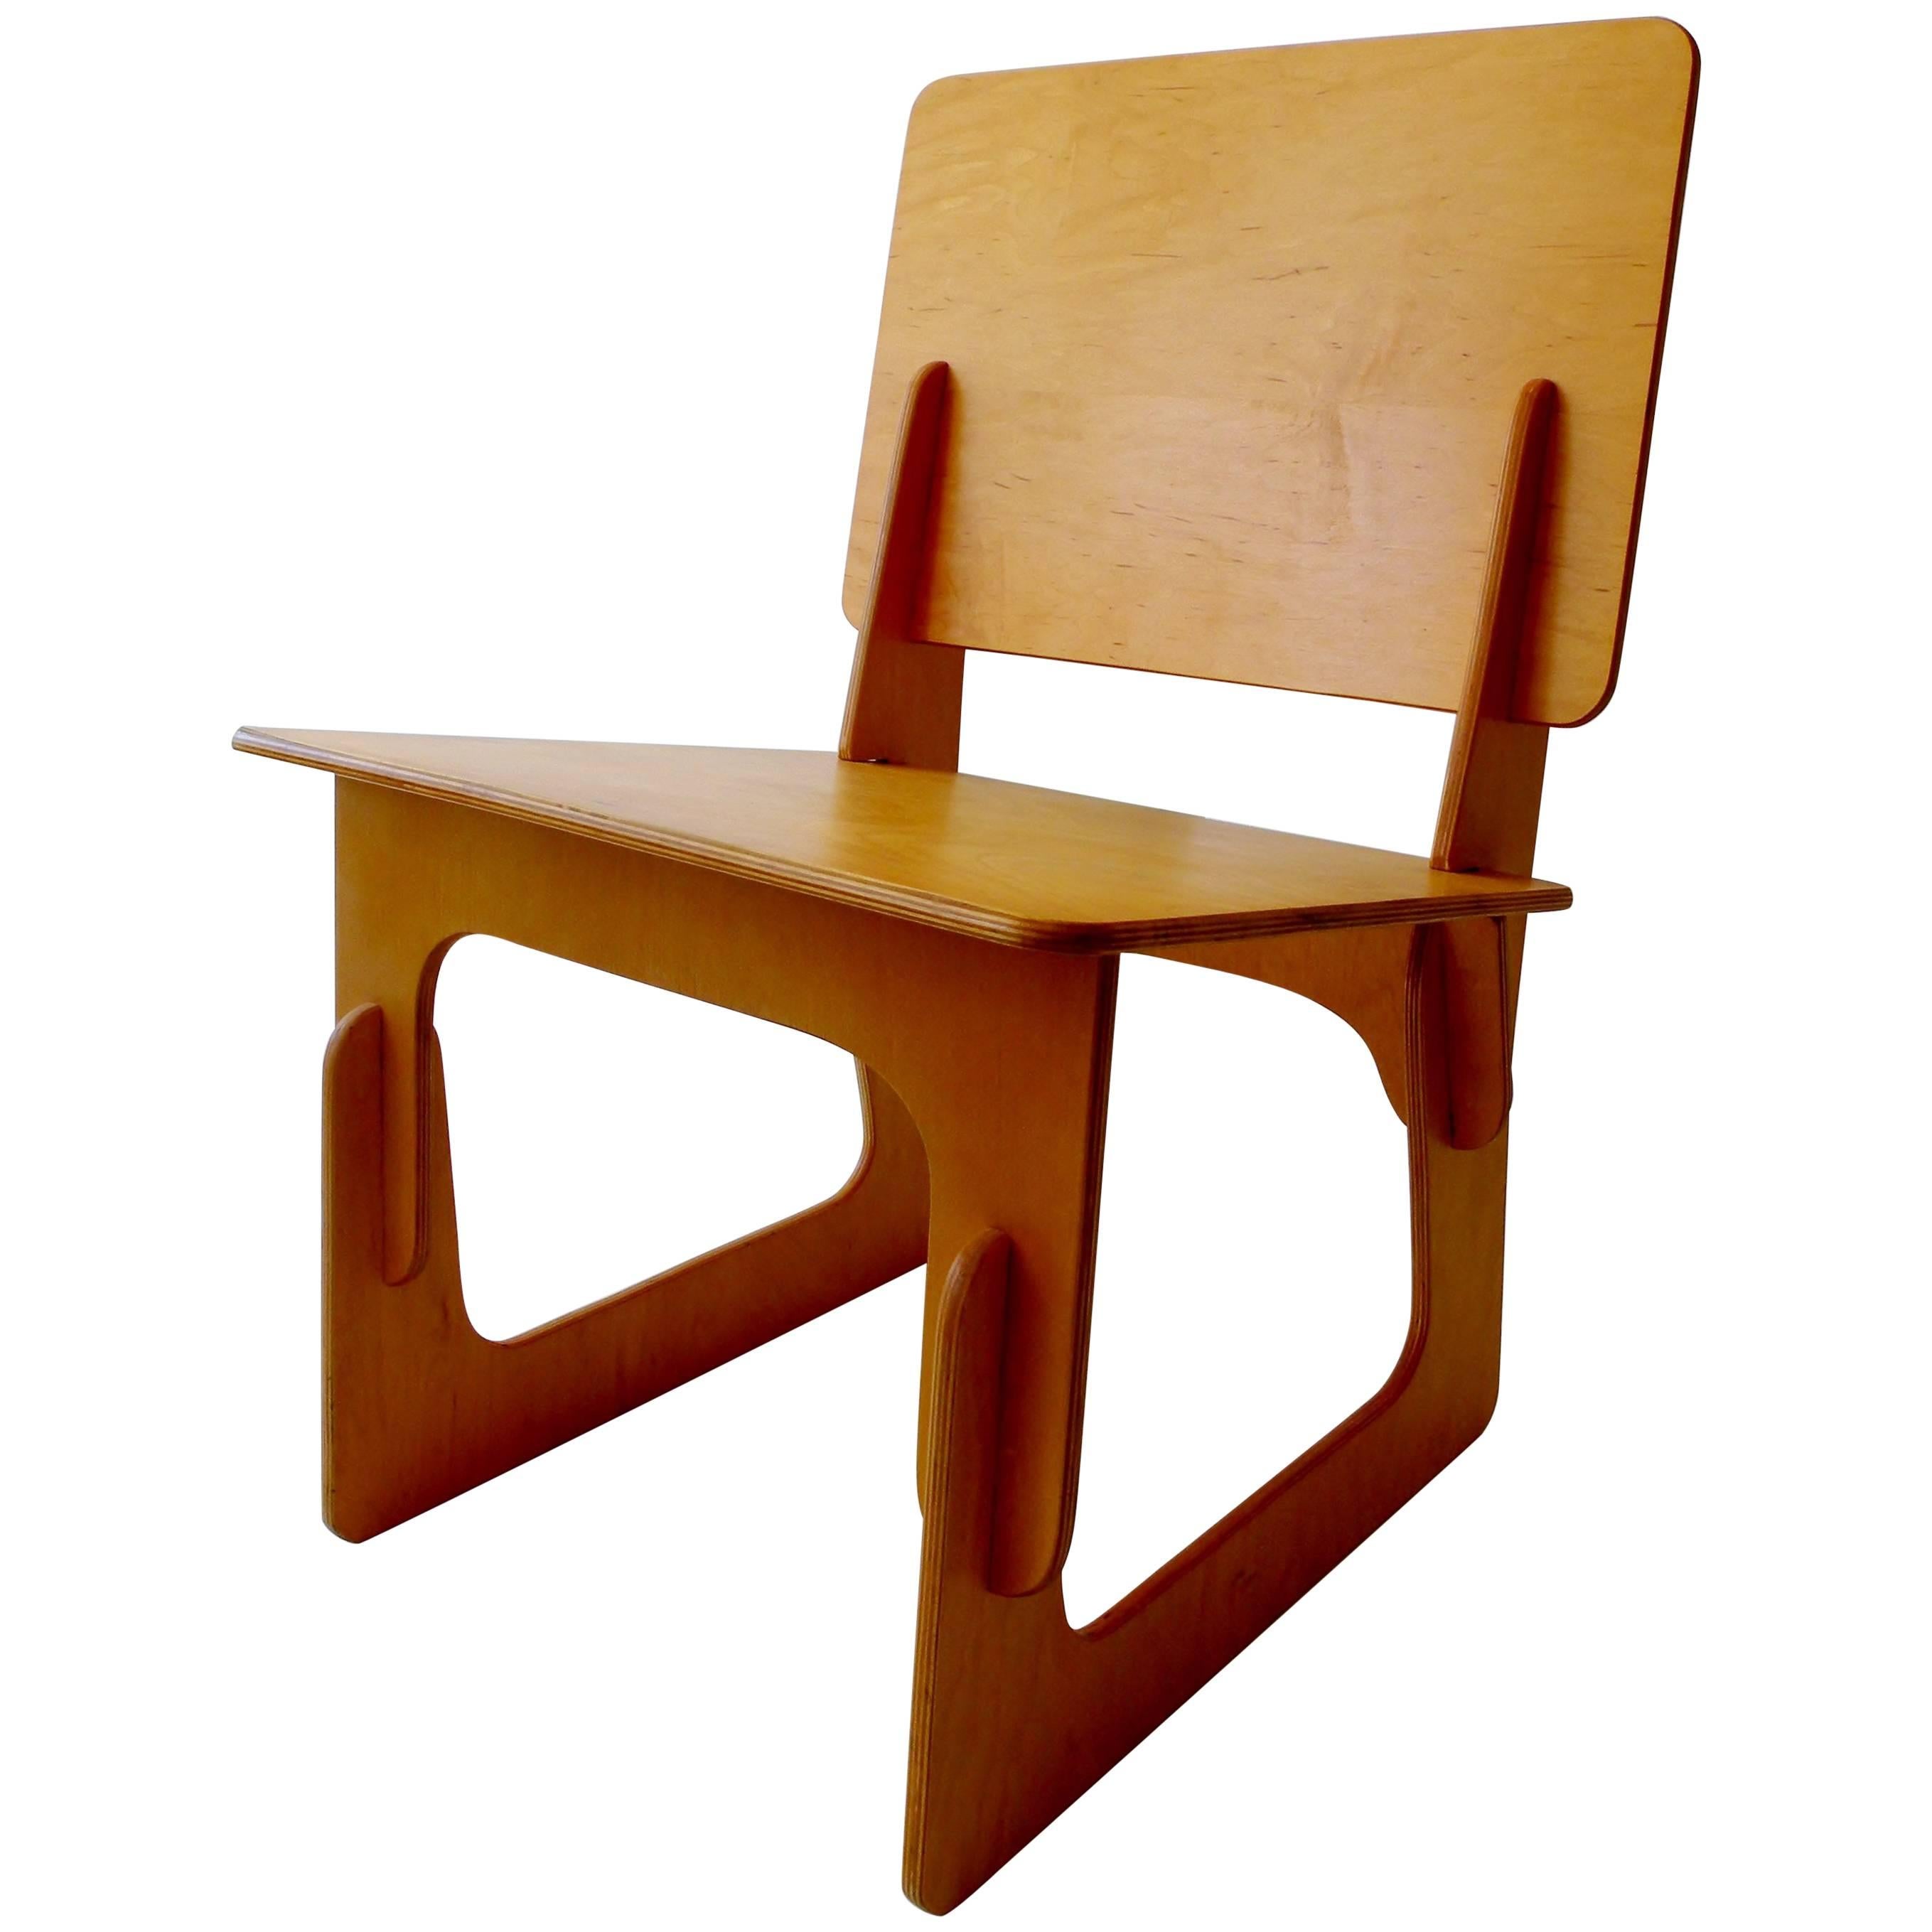 Post War Knockdown Furniture Co Plywood Lounge Chair For Sale